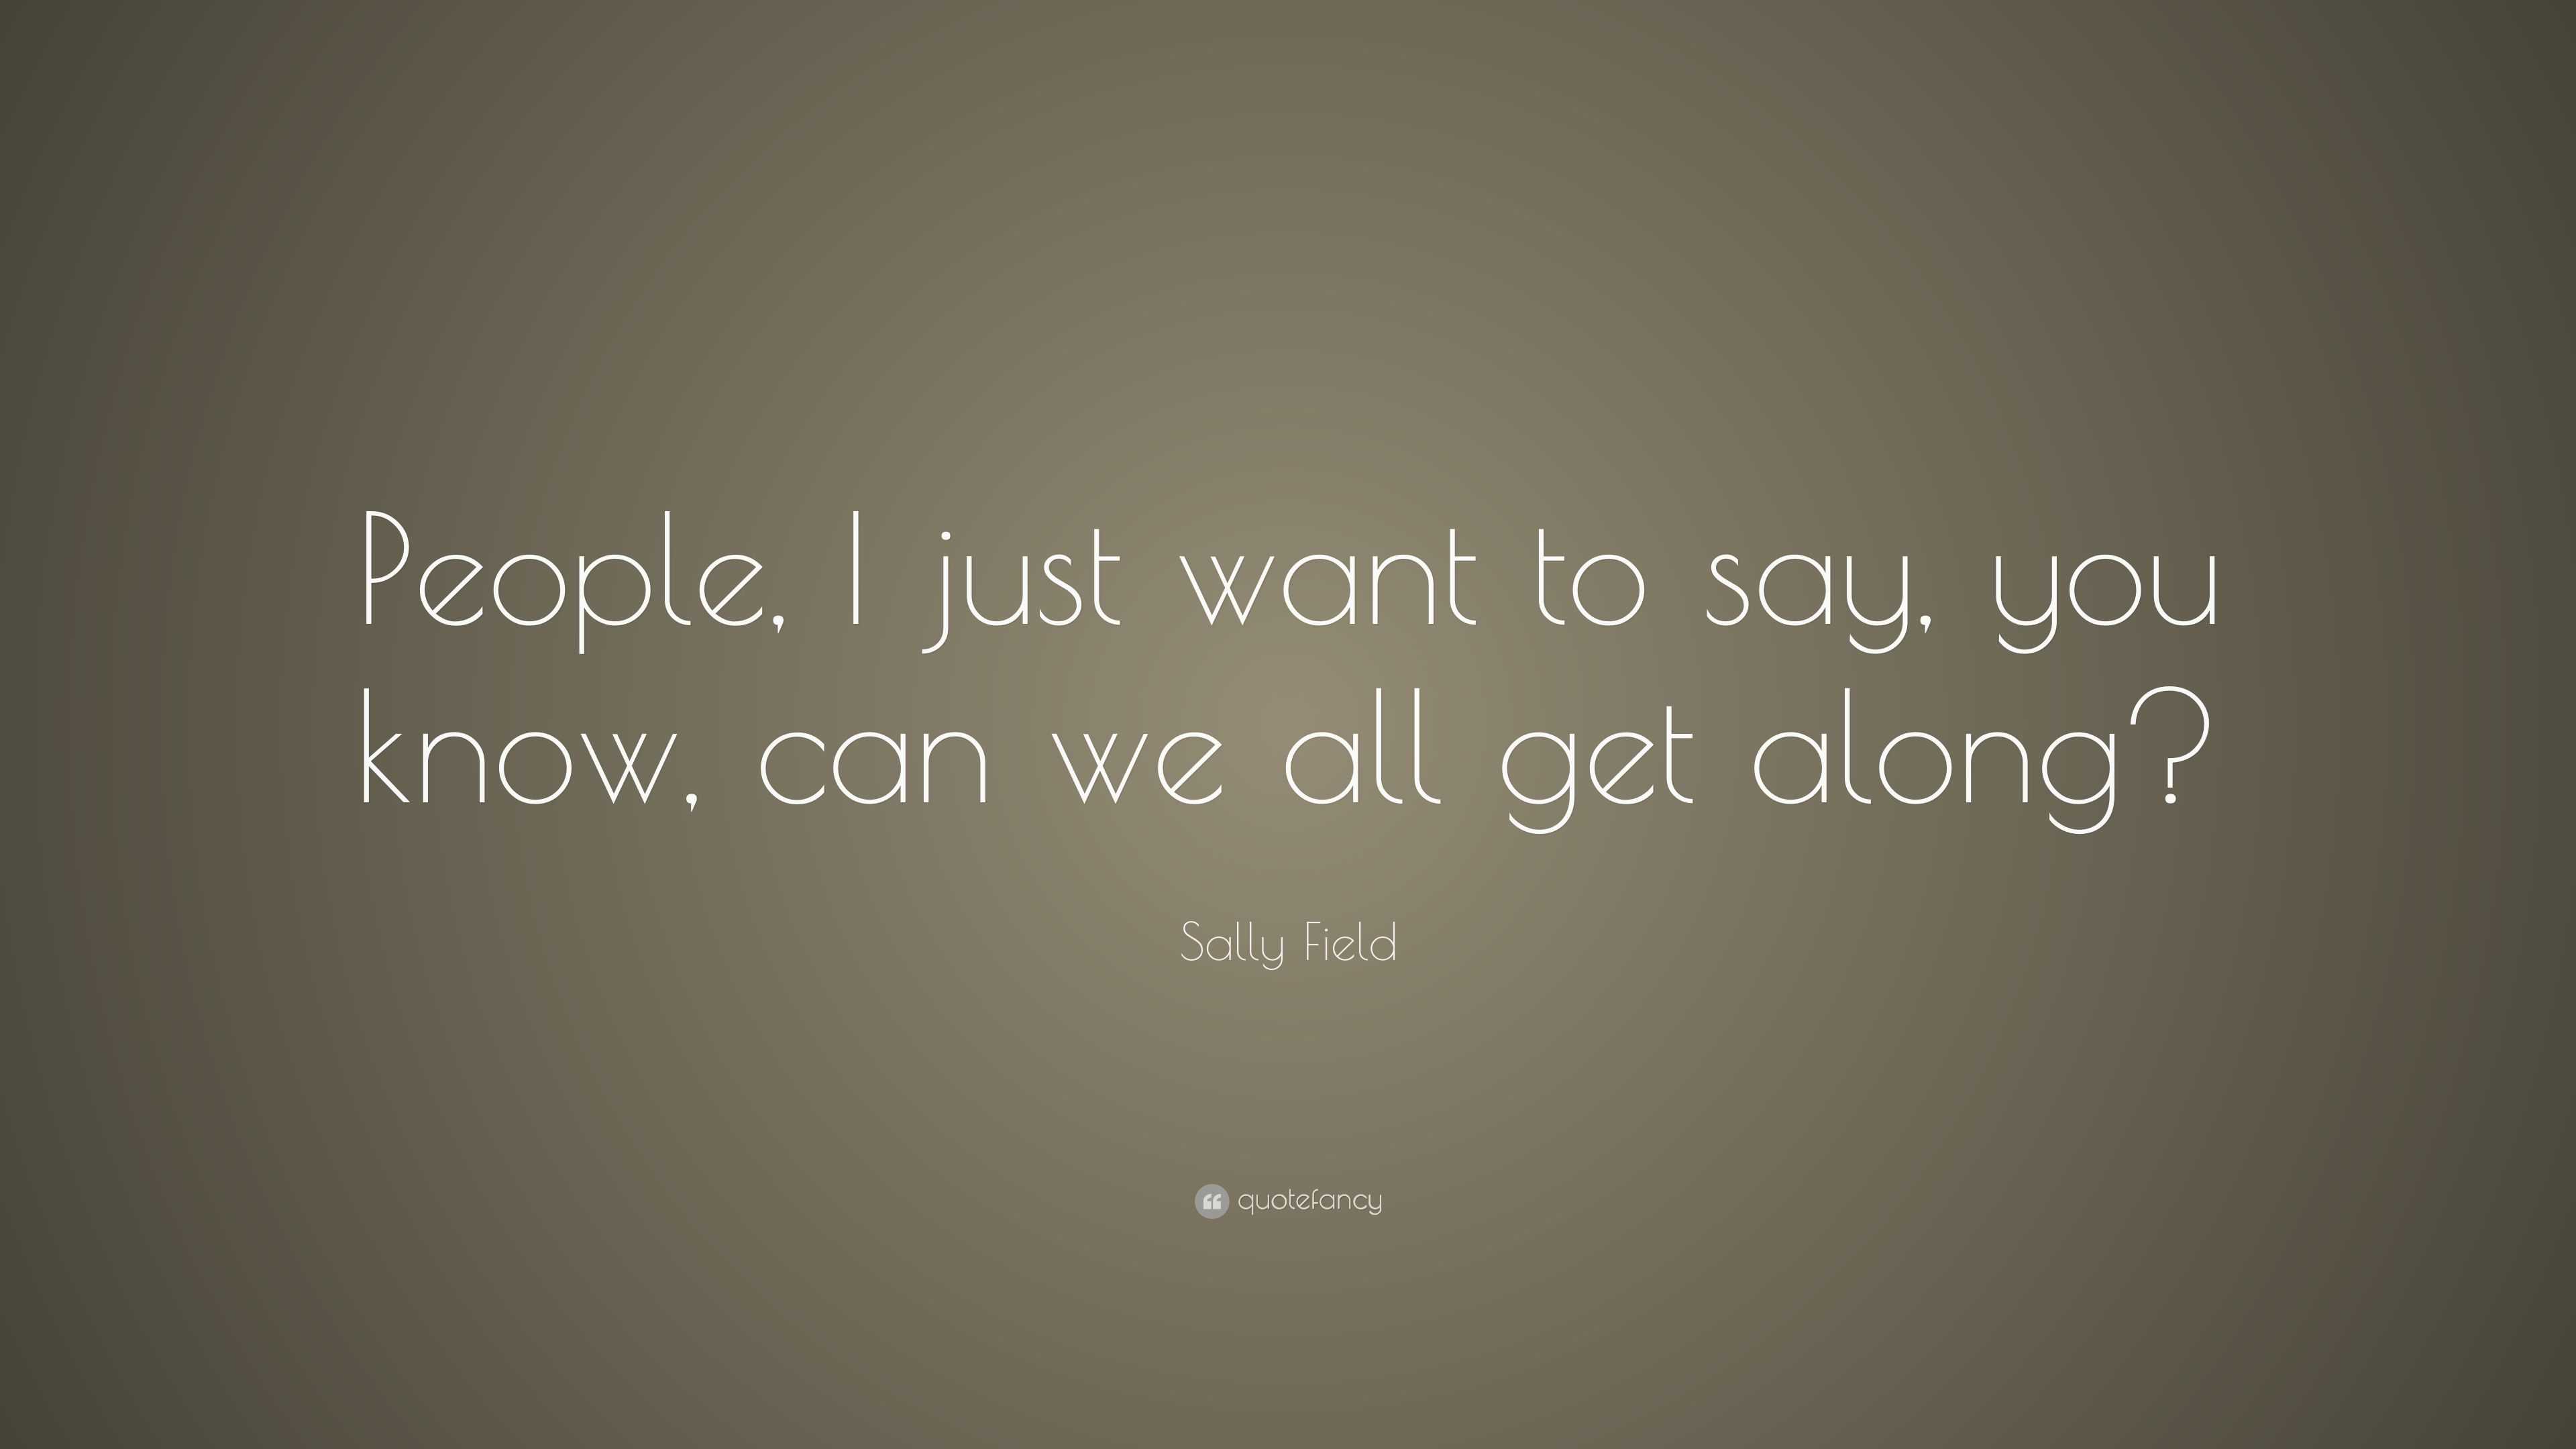 Sally Field Quote: “People, I just want to say, you know, can we all ...